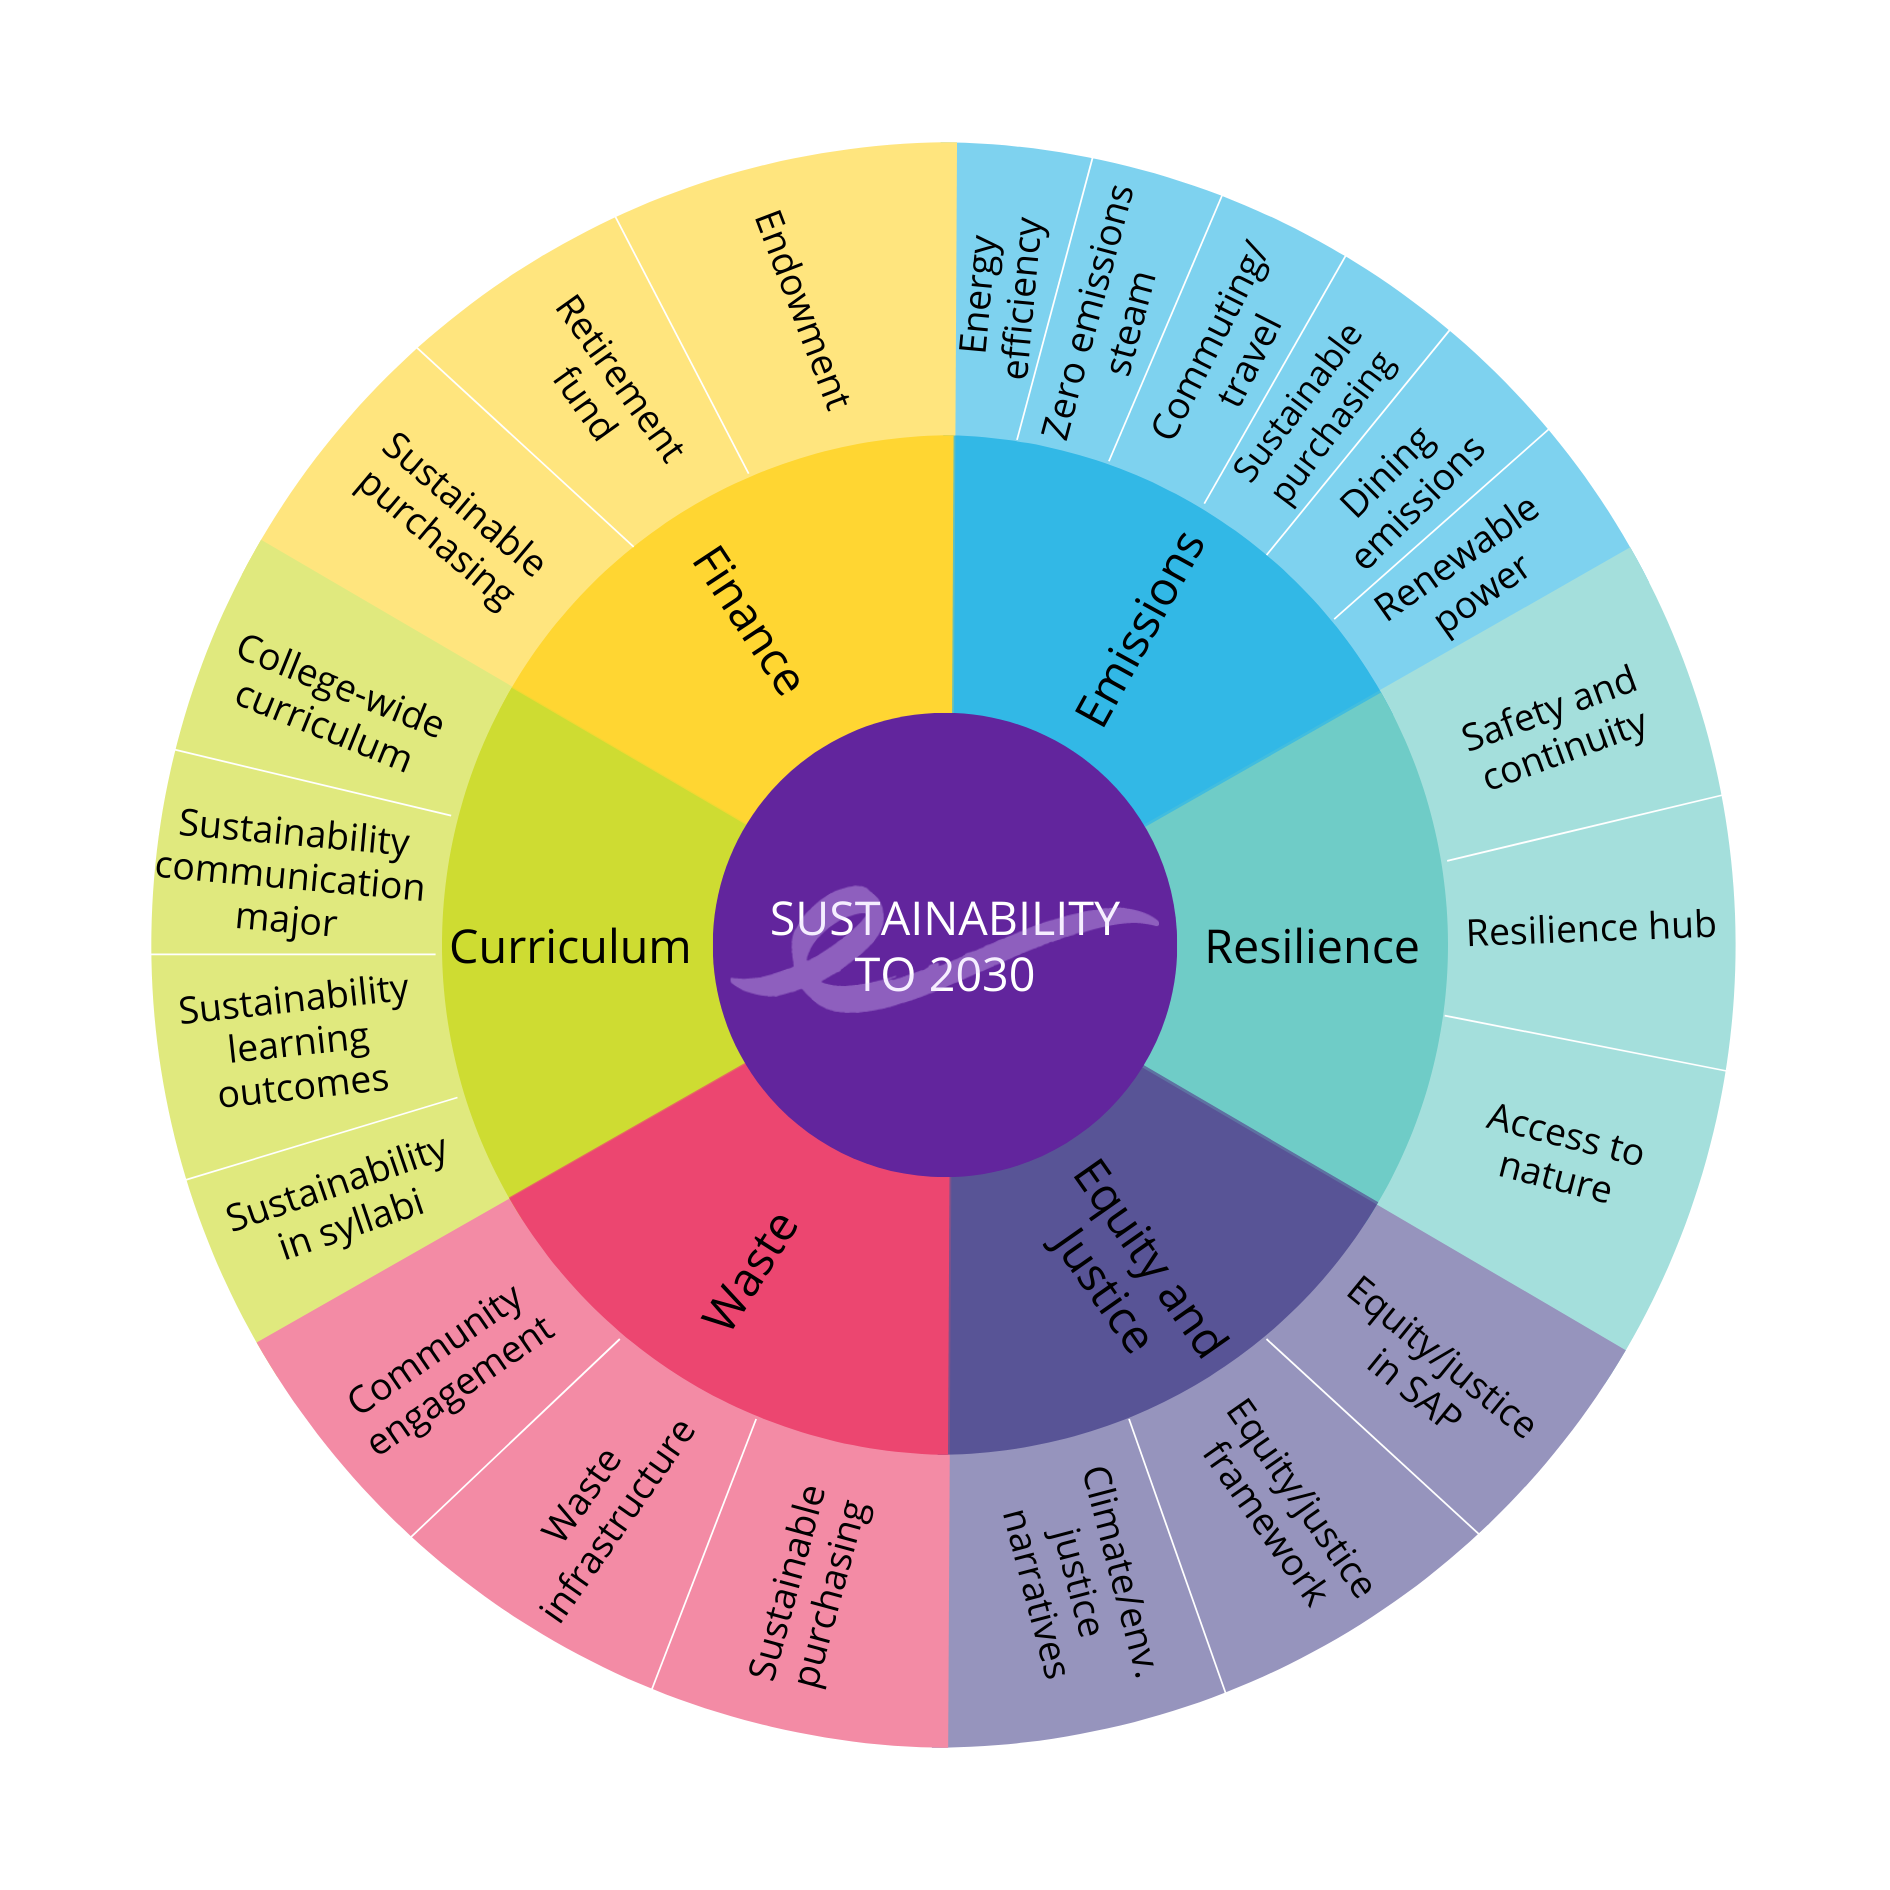 sustainability strategy wheel divided into 6 sections; curriculum, finance, emissions, resilience, equity and justice, and waste